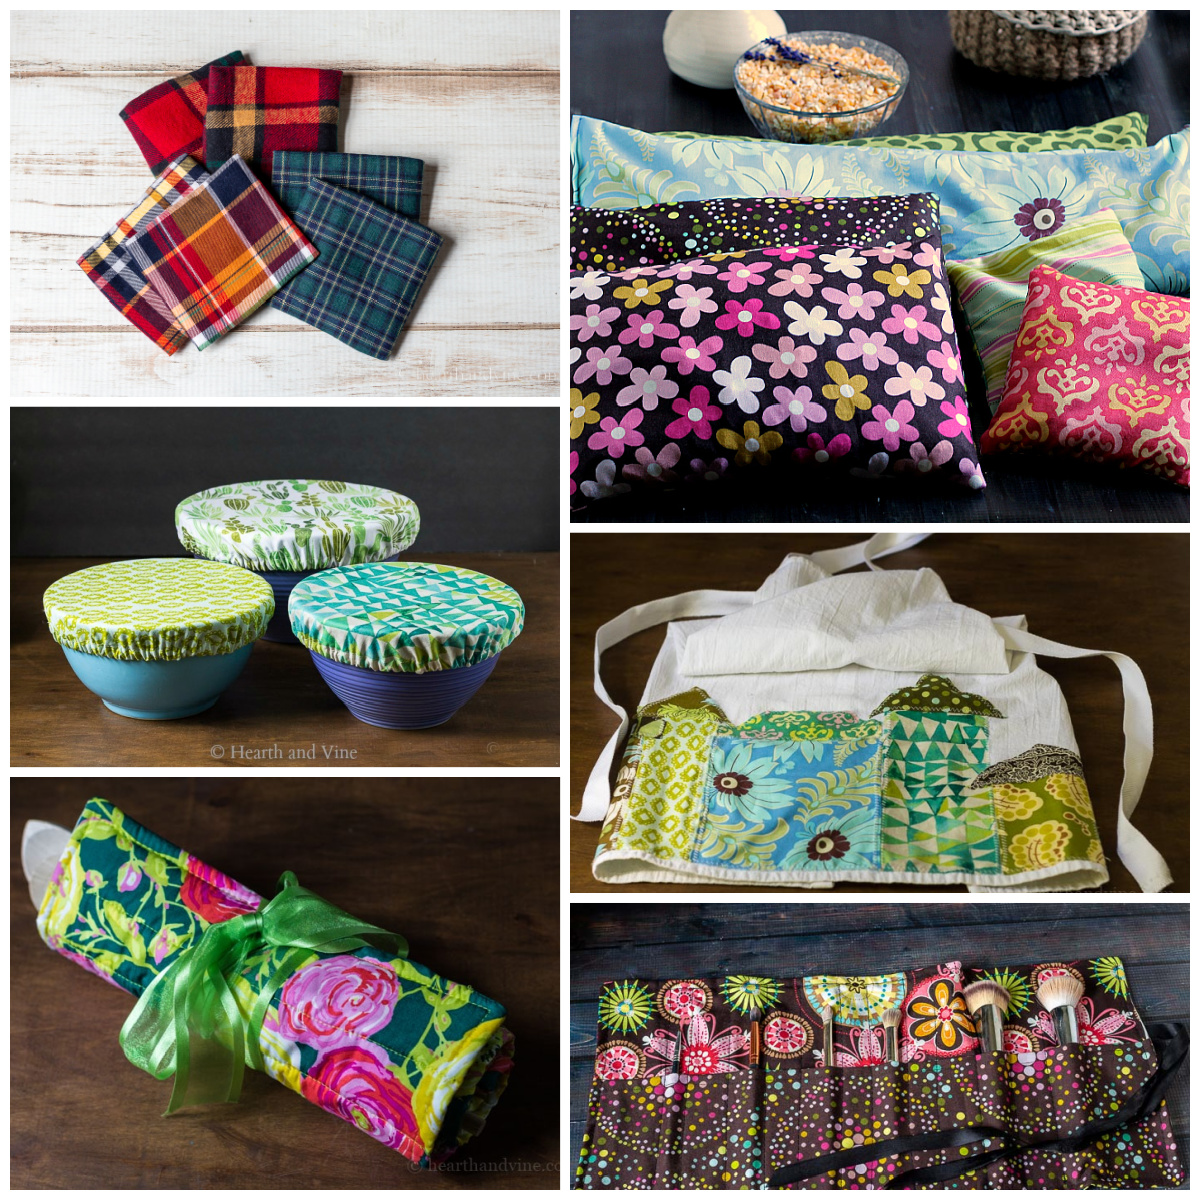 13 Easy Handmade Sewn Gifts to Try